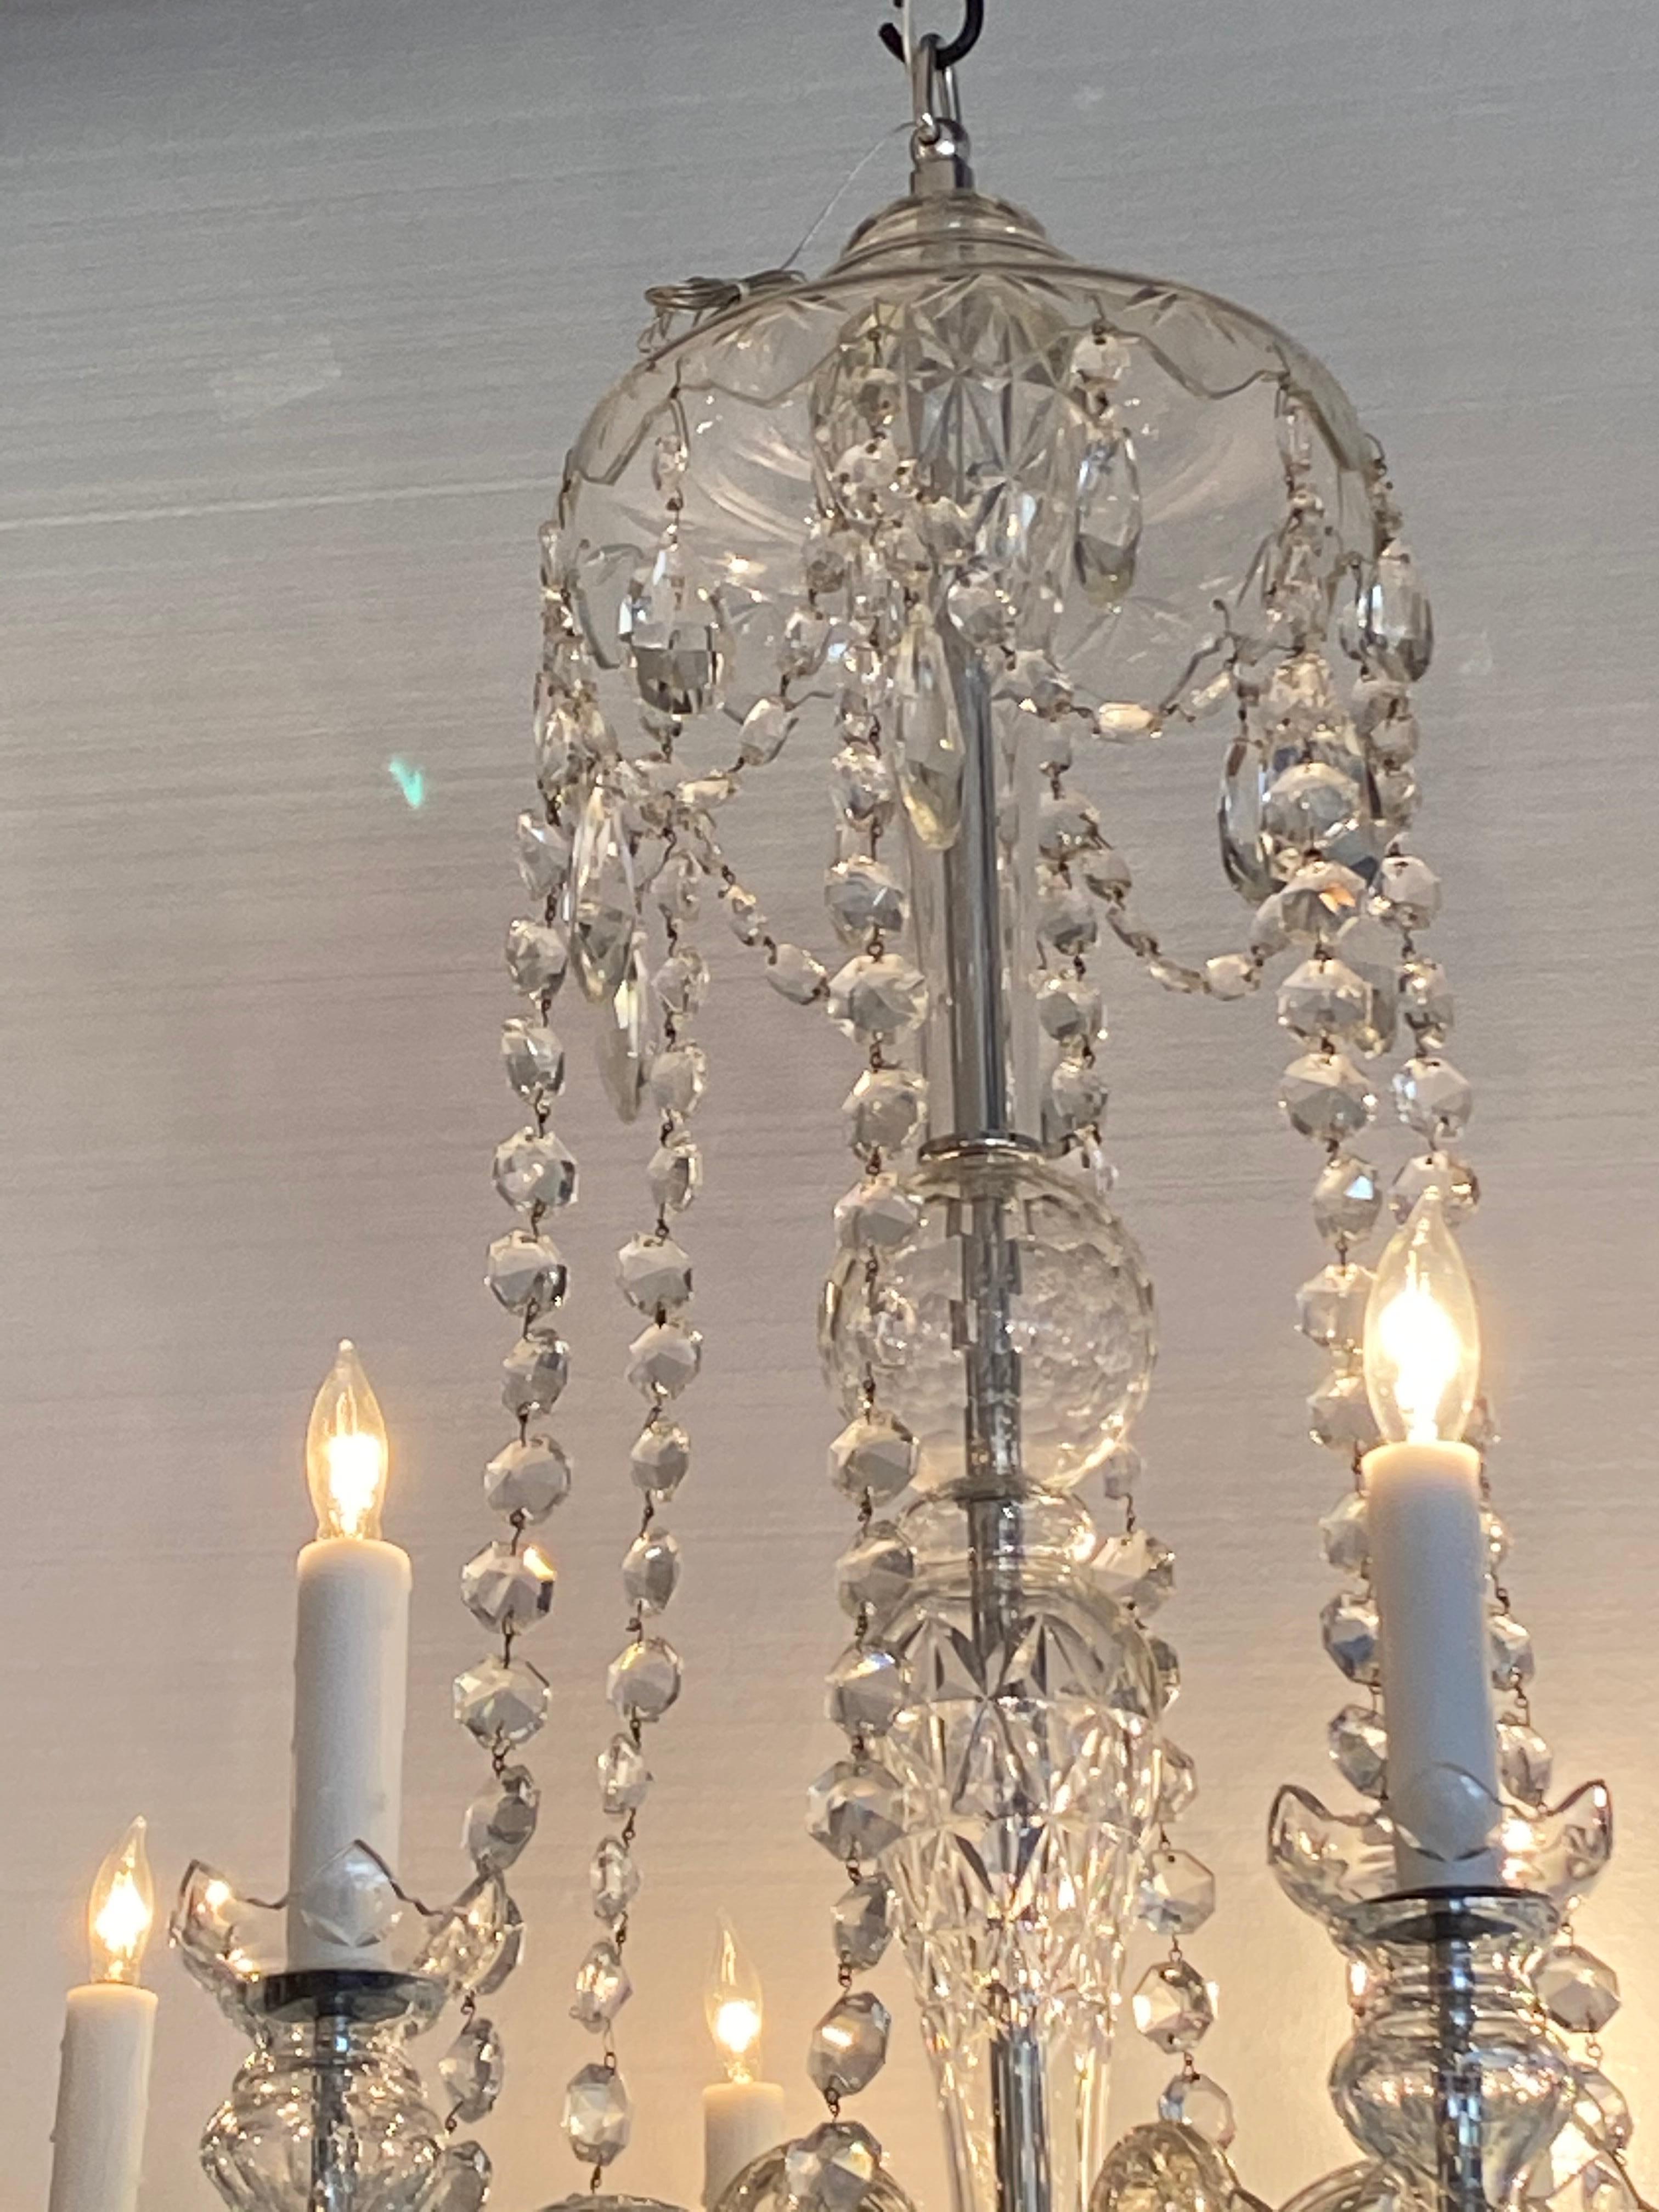 8 light Waterford chandelier, in excellent conditions, with 4